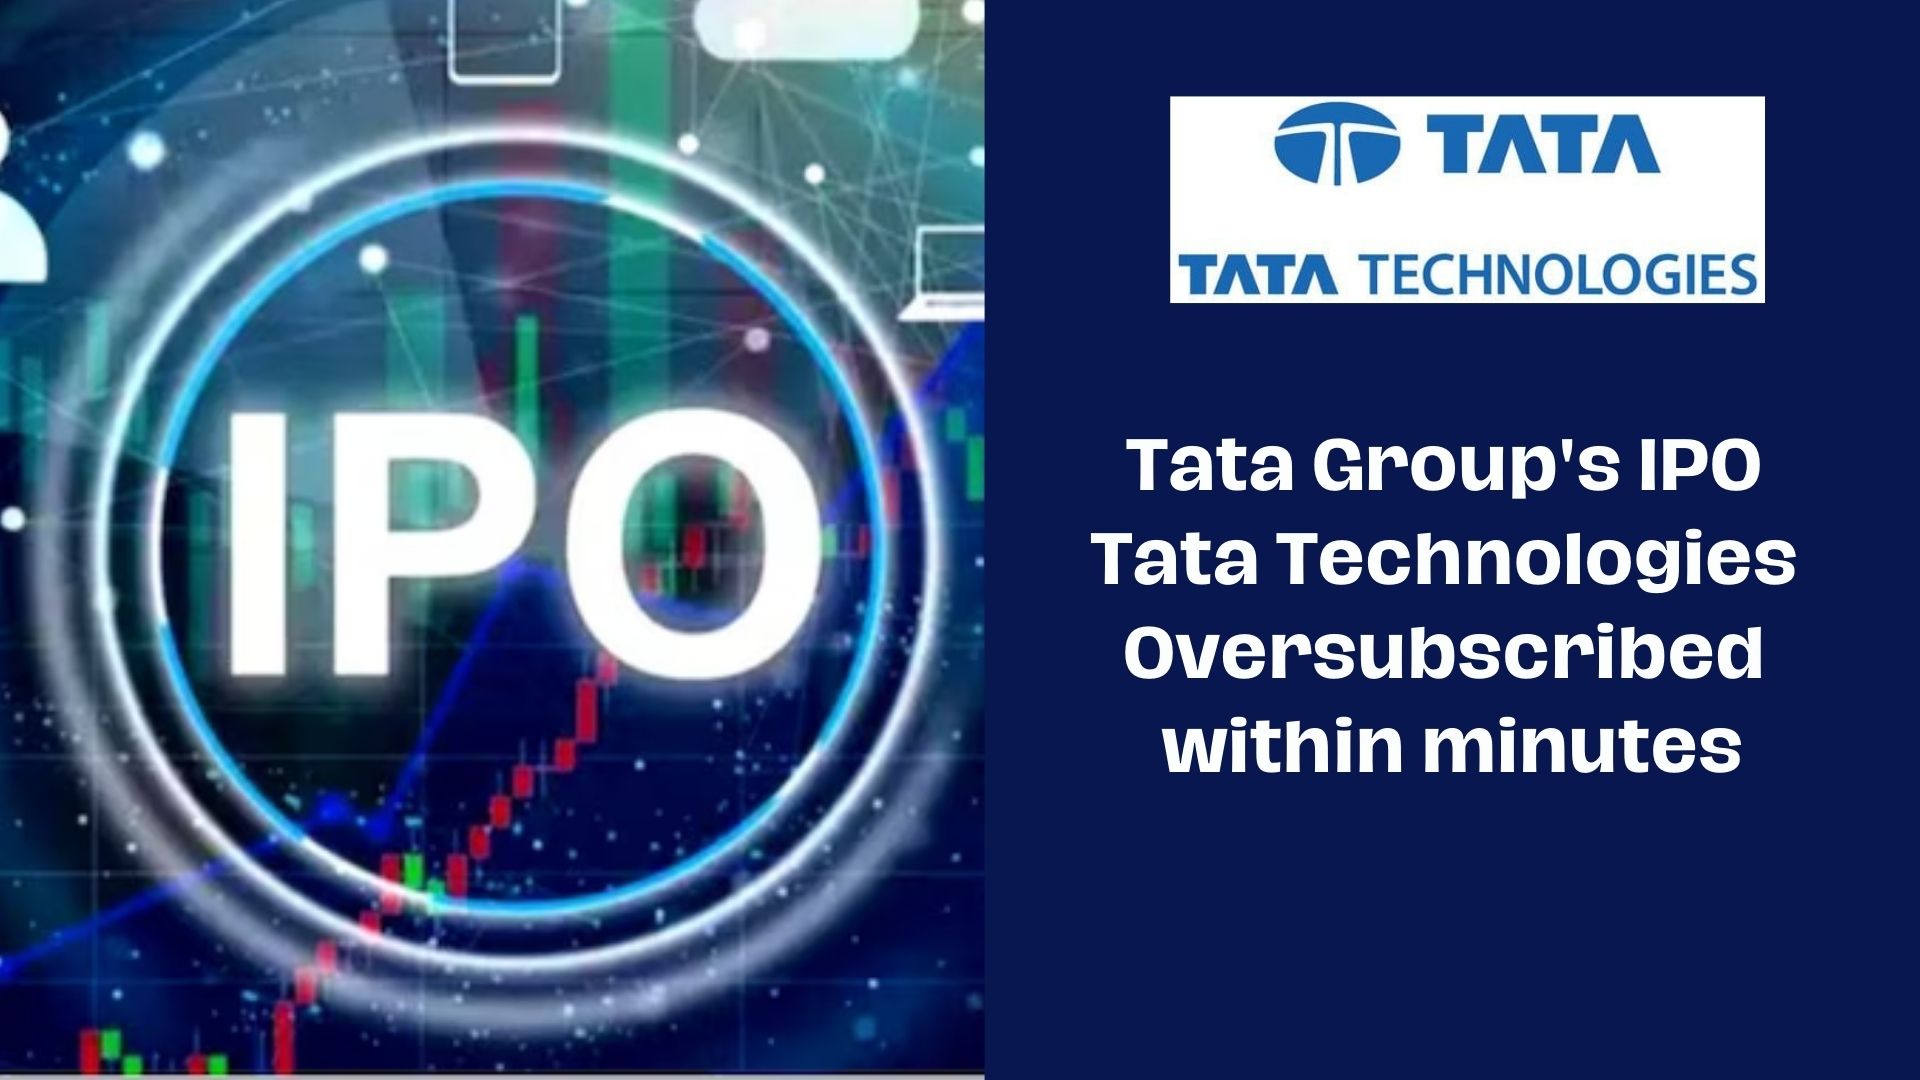 Tata Group's IPO Tata Technologies Oversubscribed within minutes